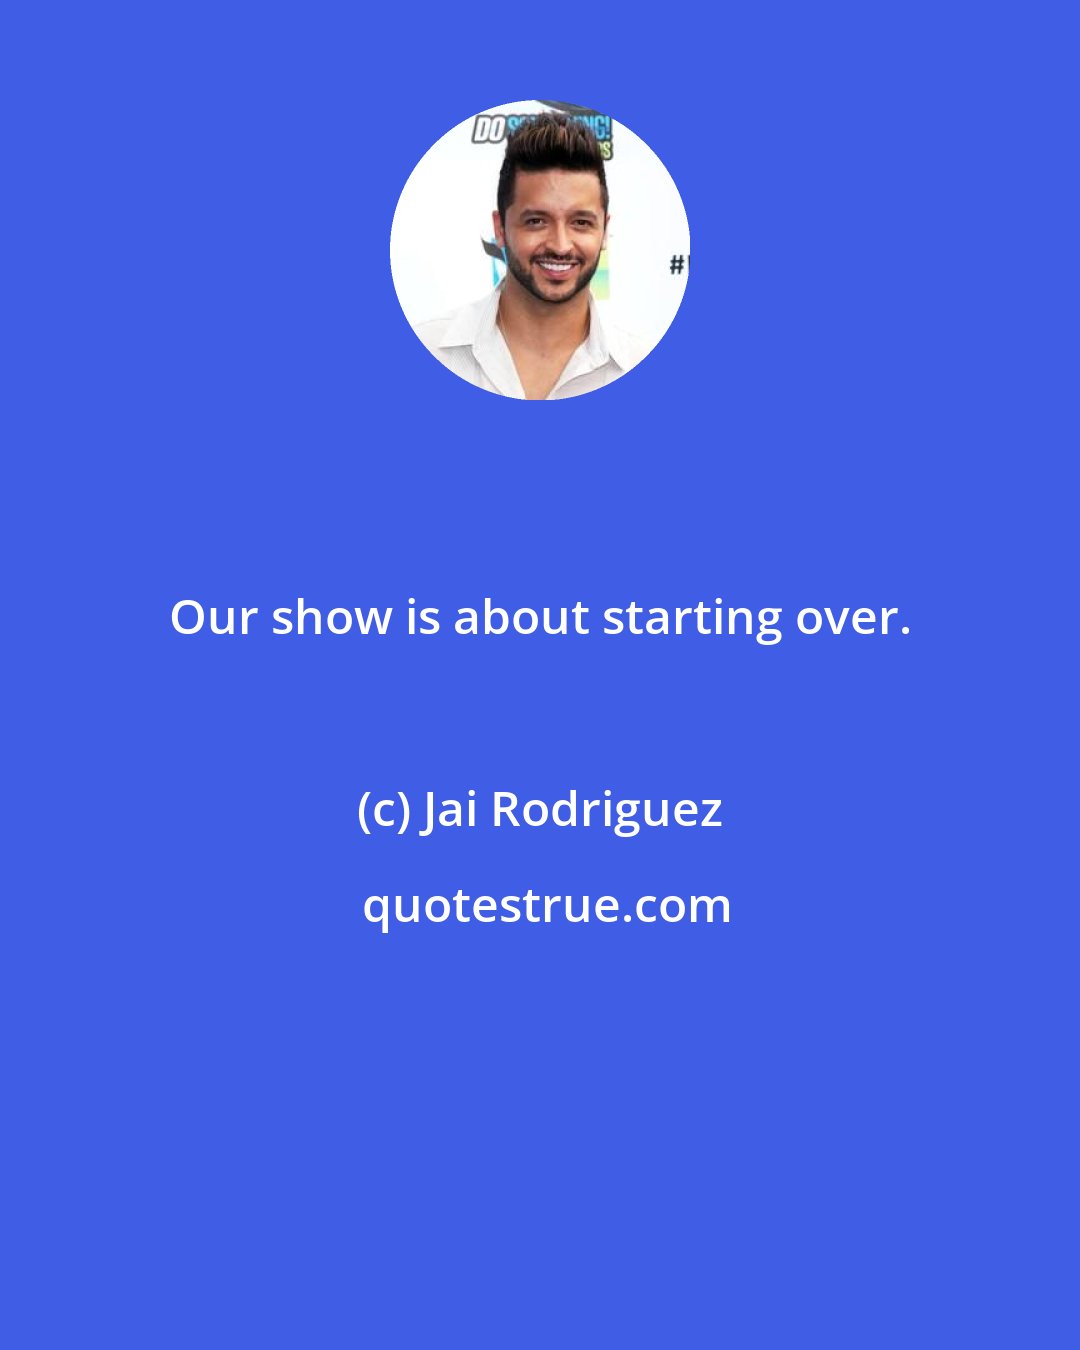 Jai Rodriguez: Our show is about starting over.